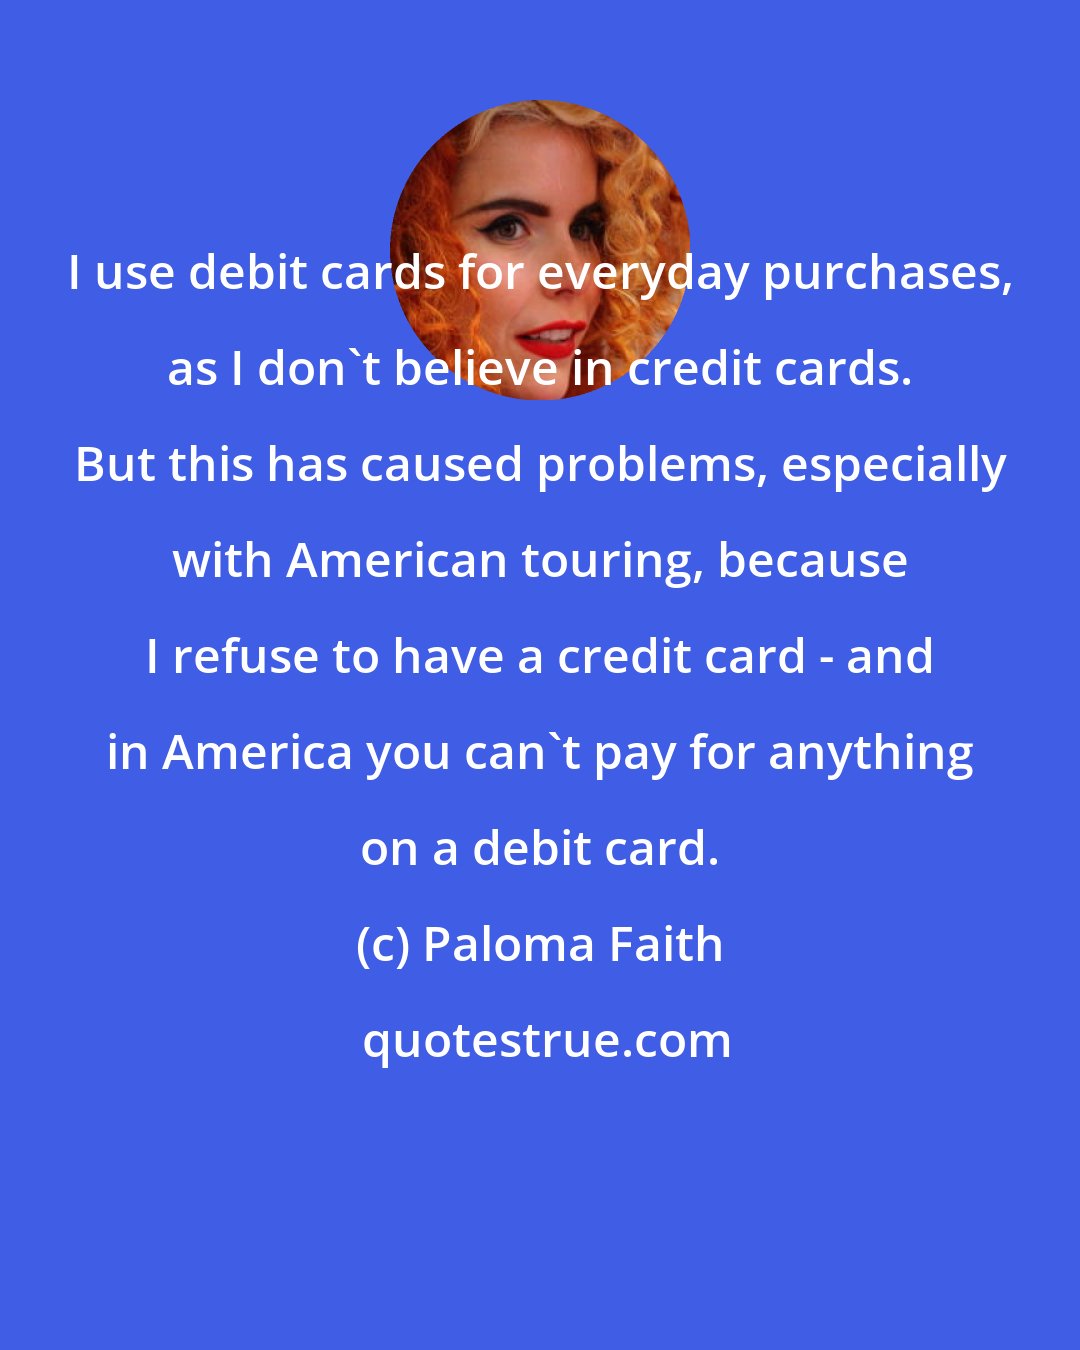 Paloma Faith: I use debit cards for everyday purchases, as I don't believe in credit cards. But this has caused problems, especially with American touring, because I refuse to have a credit card - and in America you can't pay for anything on a debit card.